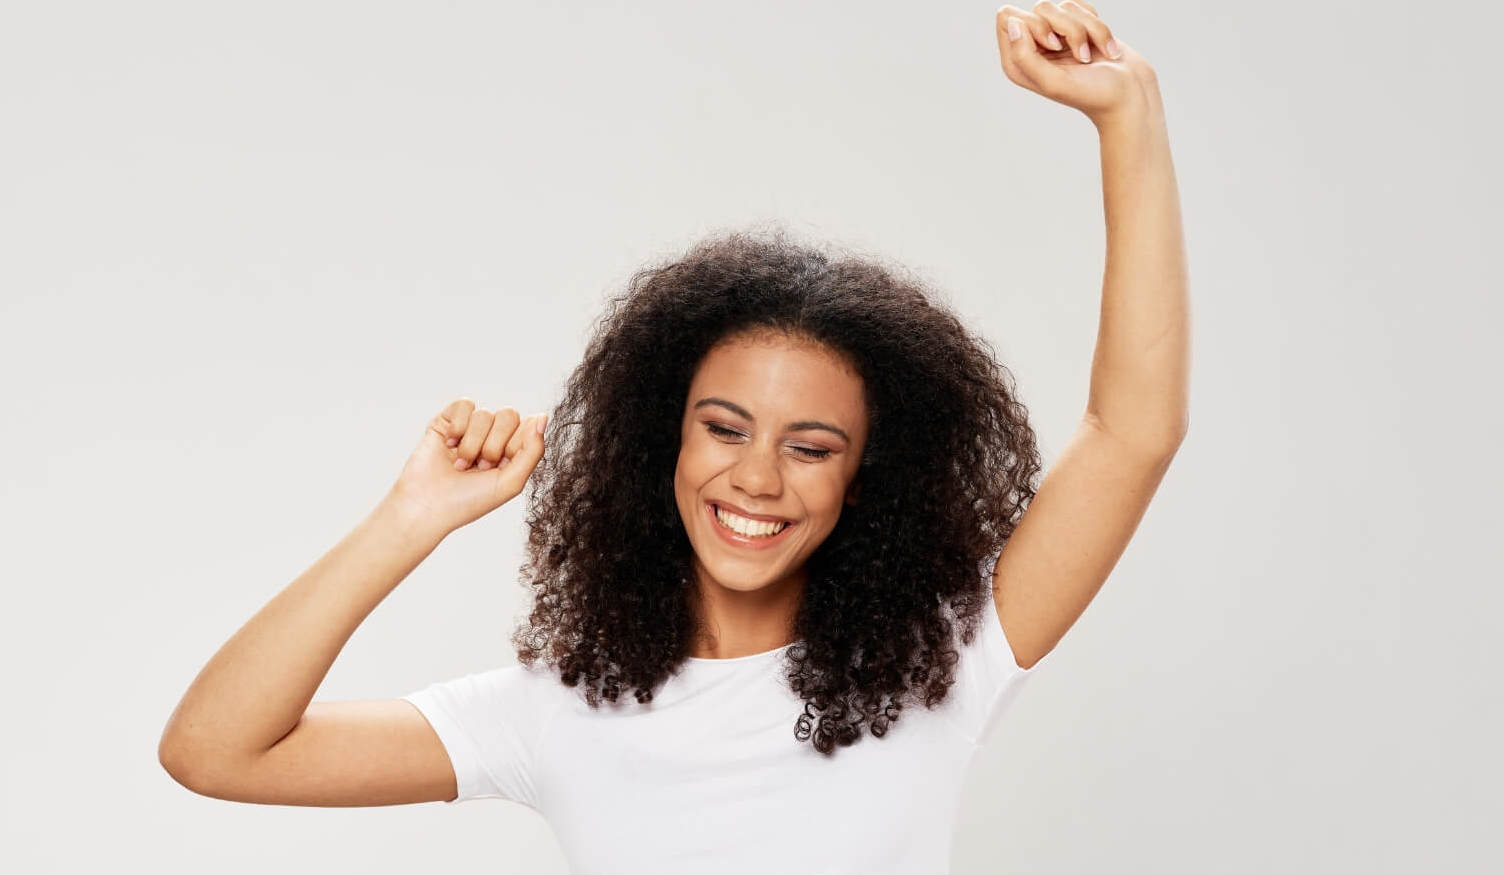 A joyful woman smiling with her arms raised in the air, signifying the freedom and happiness from her authenticity in mental wellness.